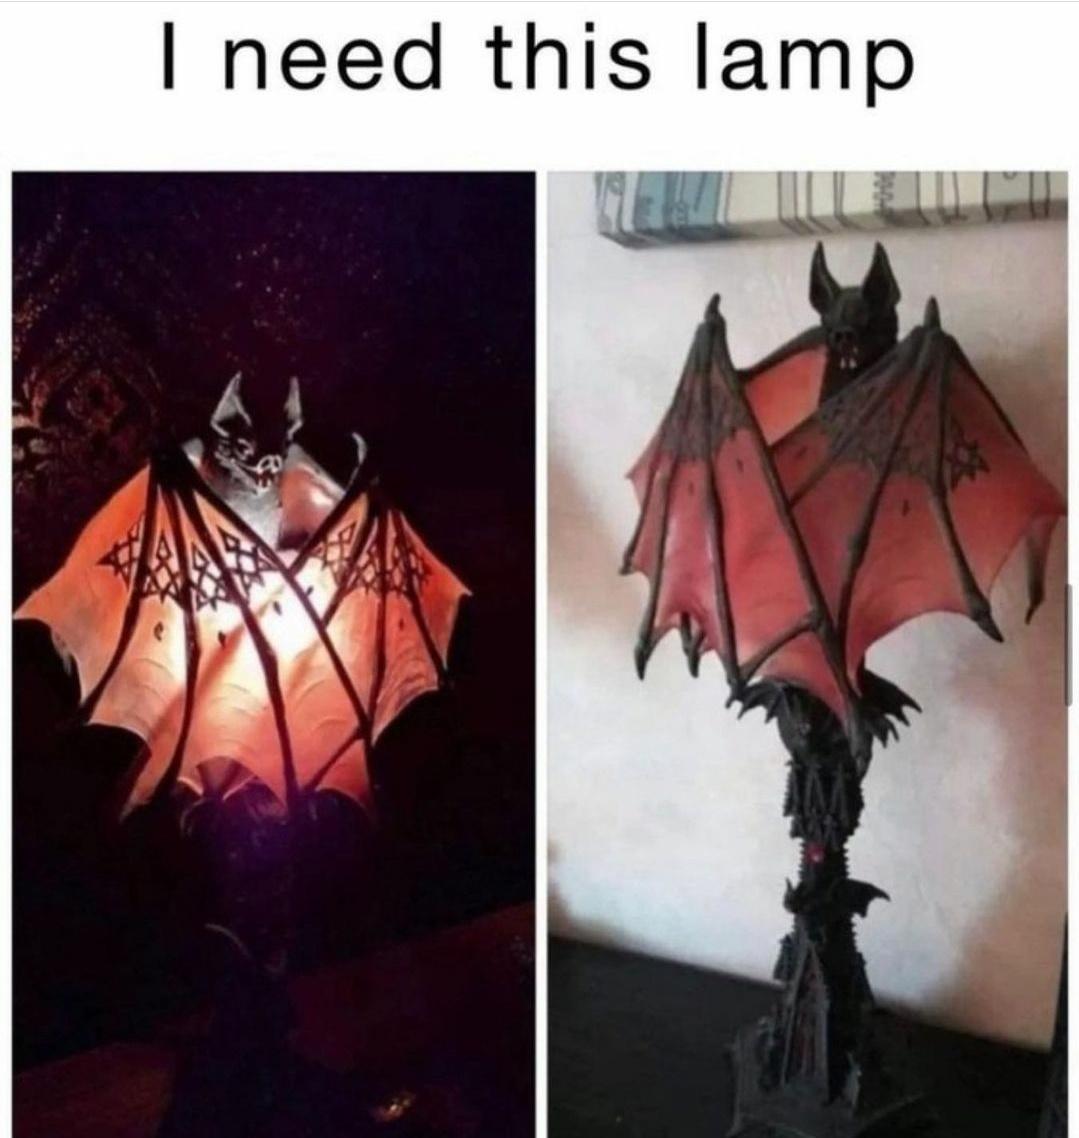 i also need this lamp